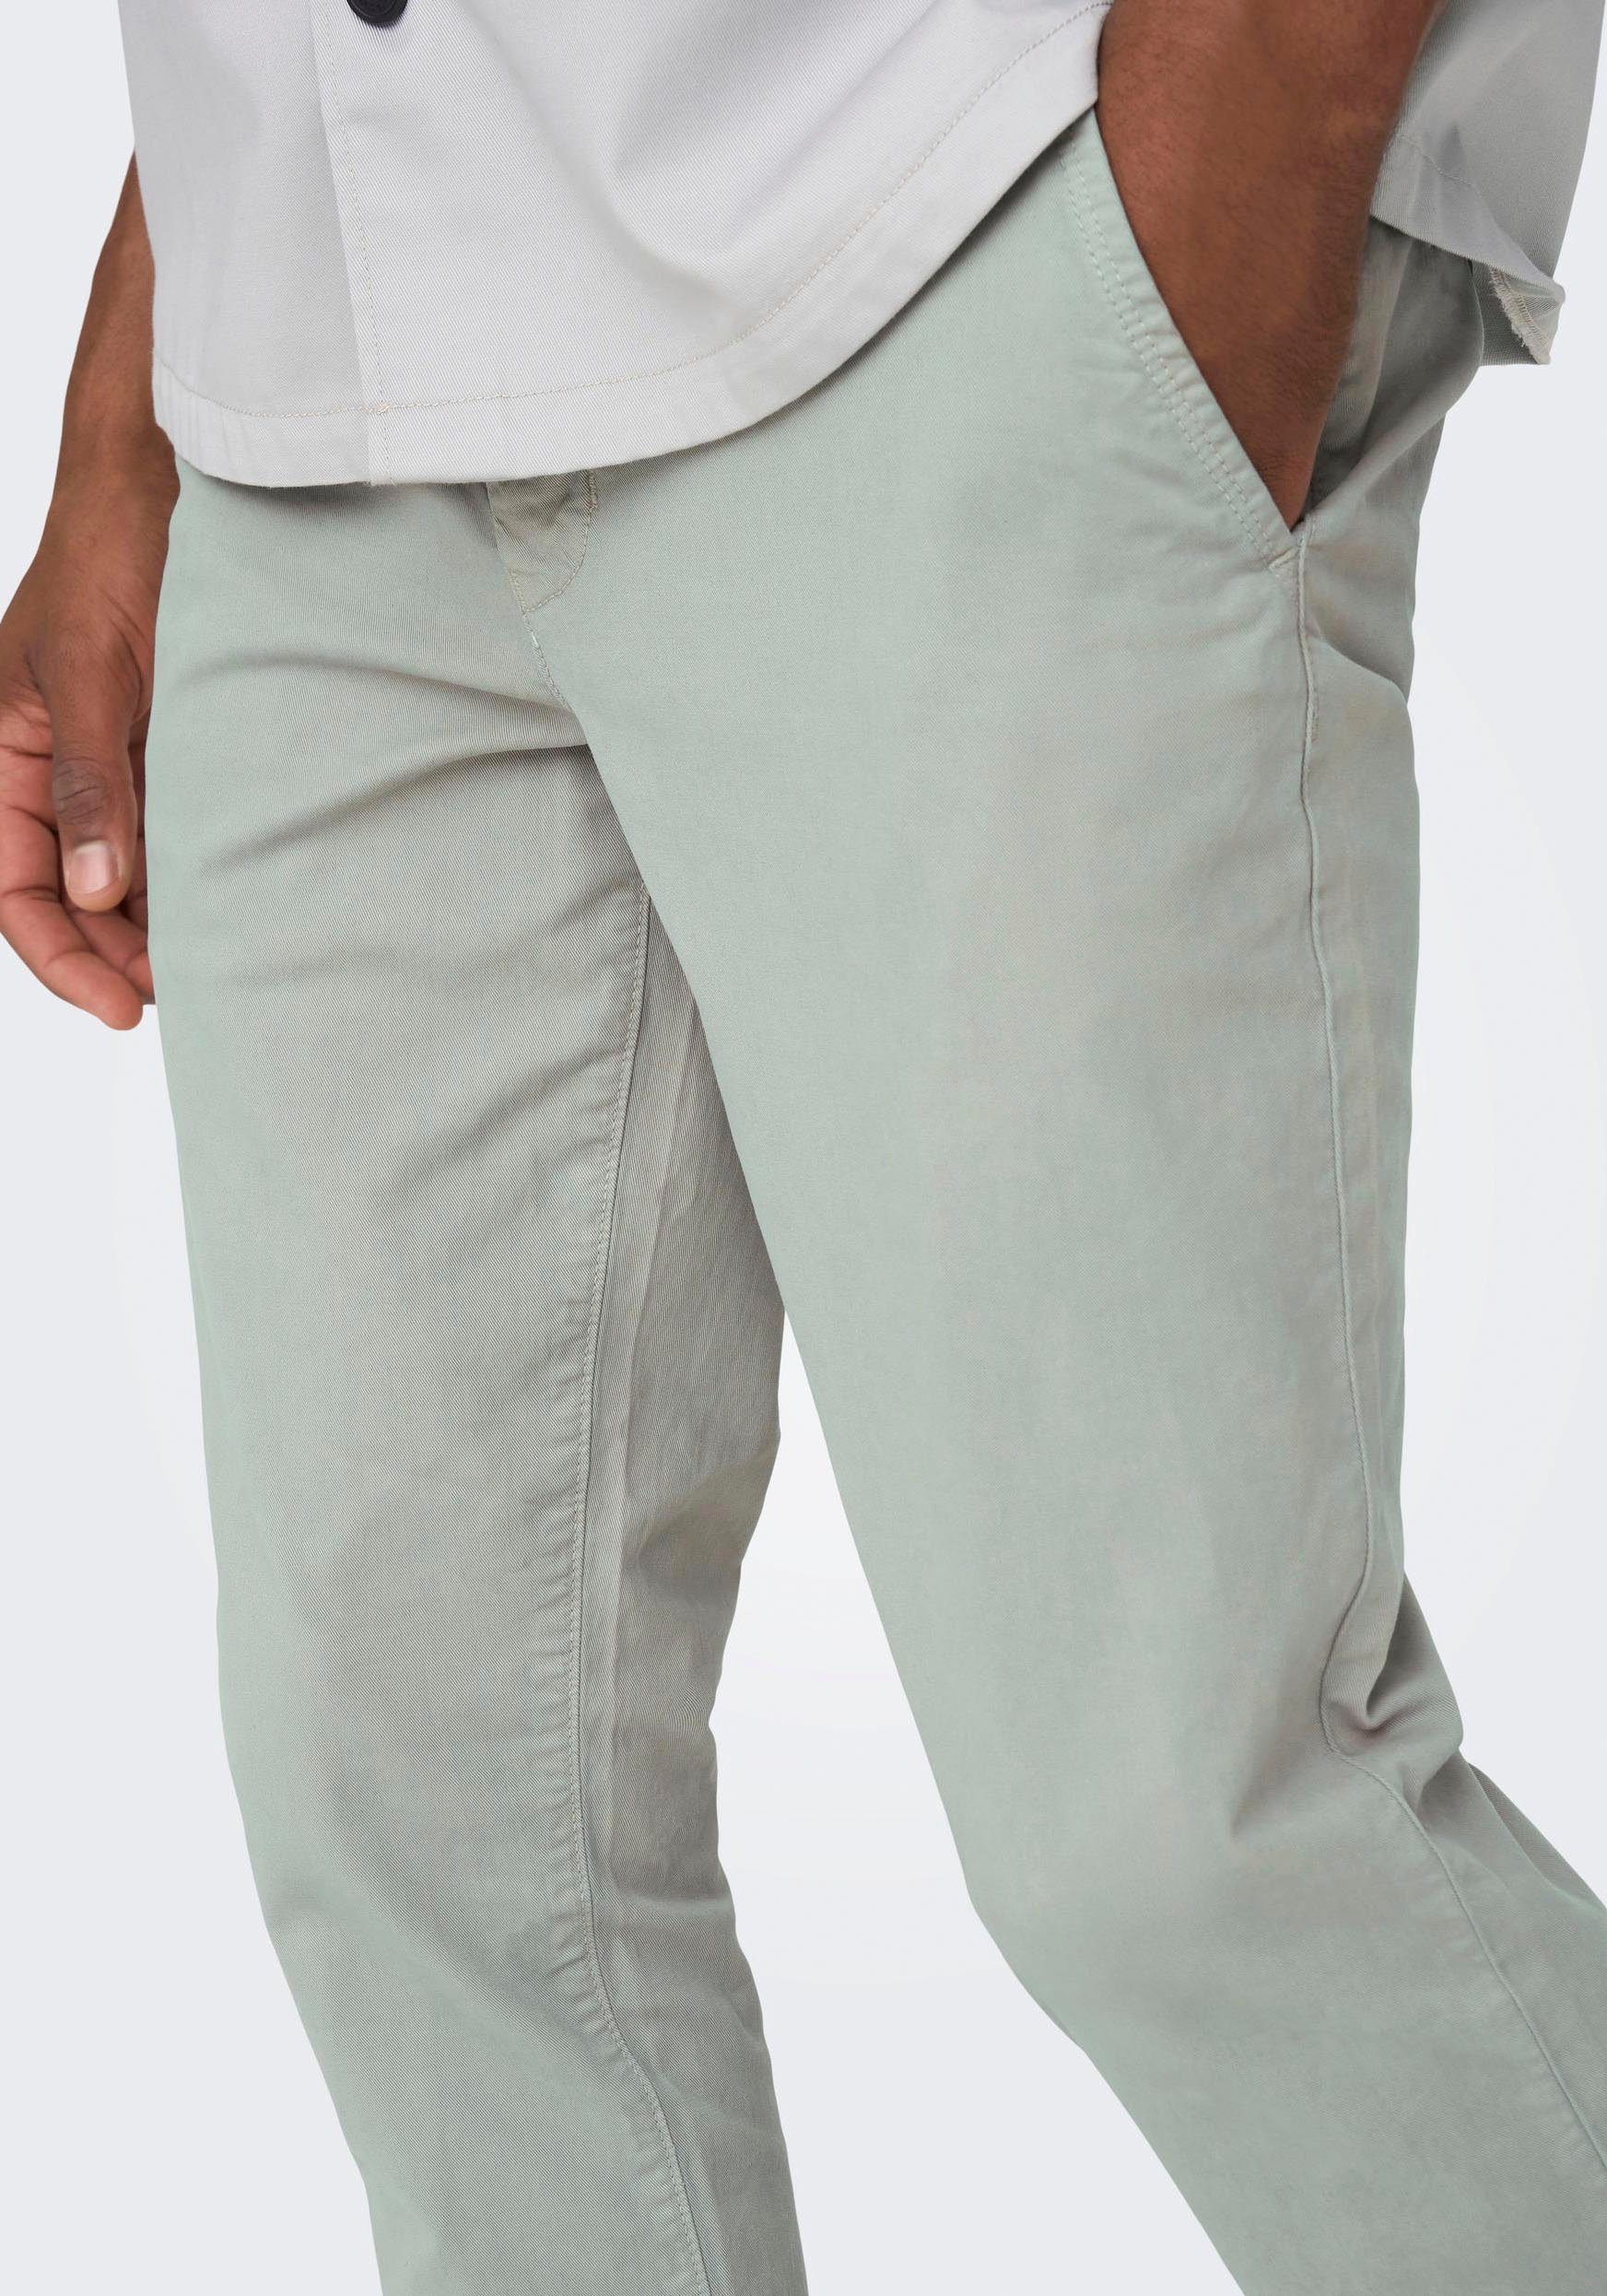 & 4-Pocket-Style SONS ONLY limestone im Chinohose